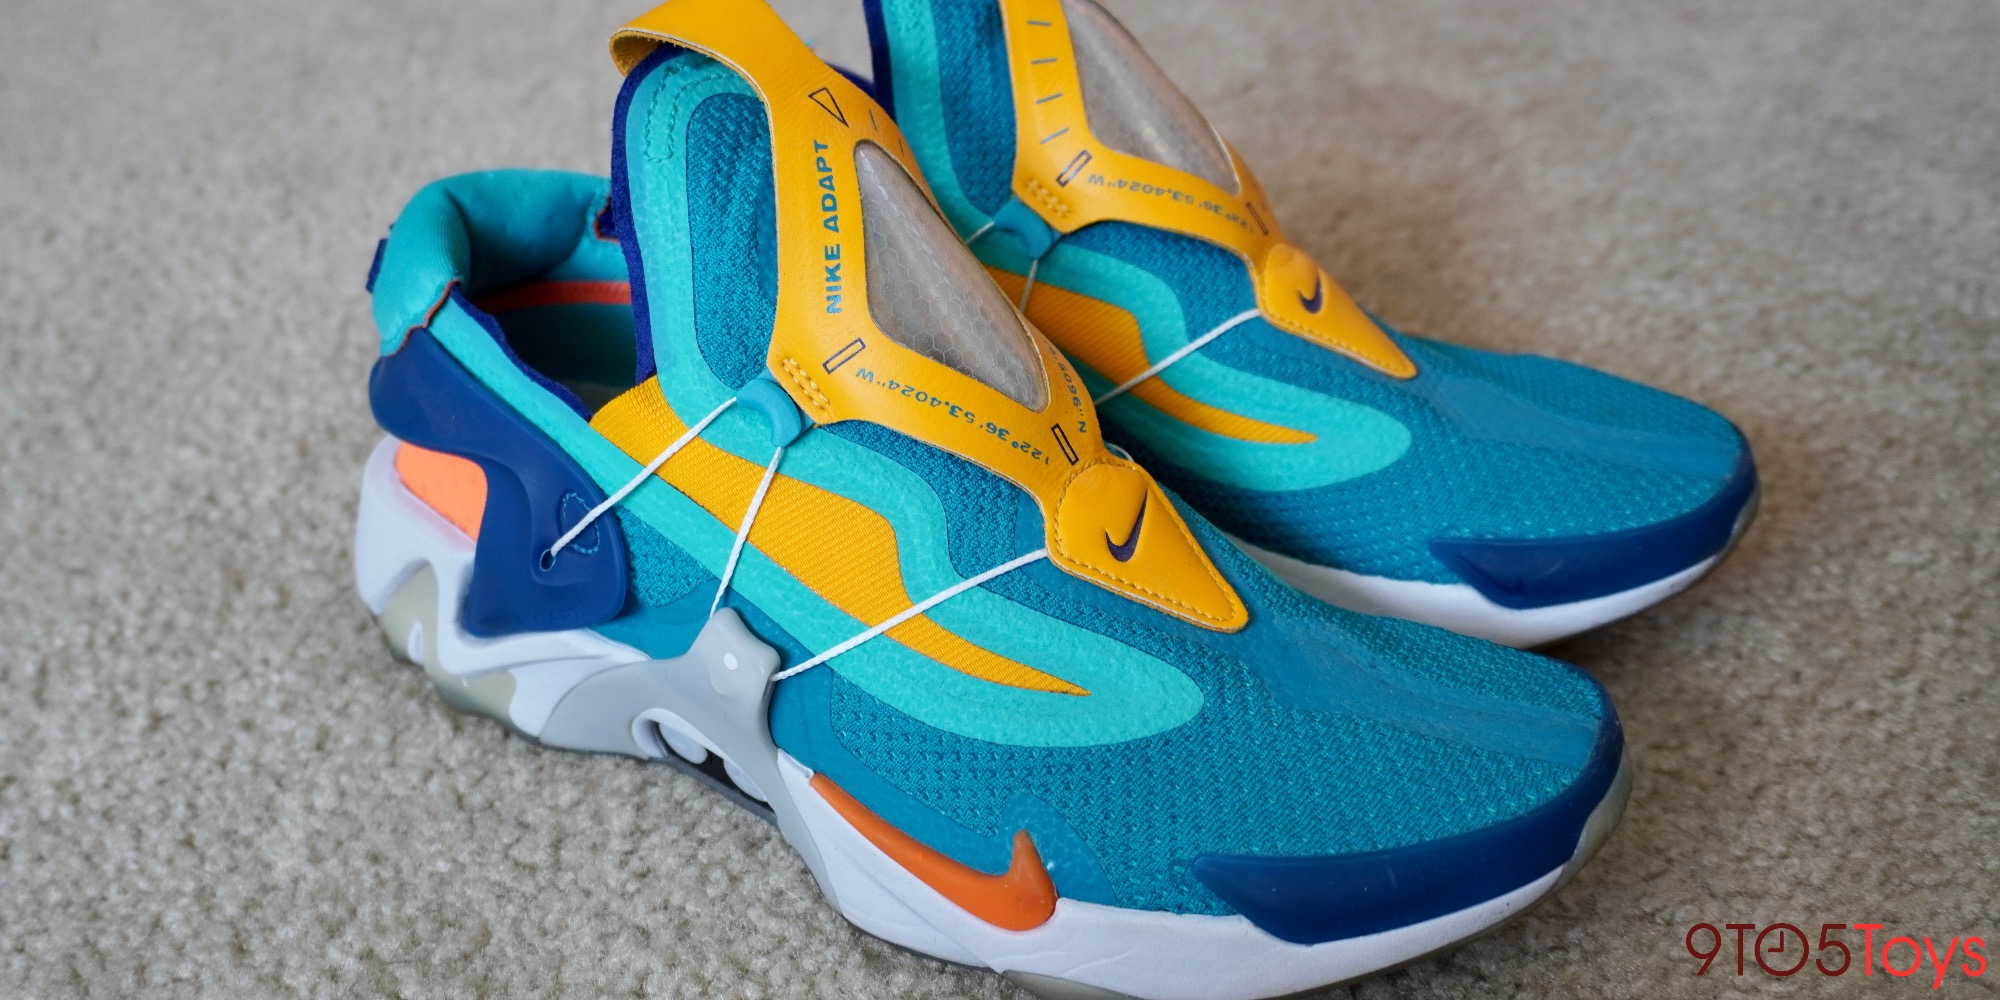 compartir Órgano digestivo natural Nike Adapt sneakers review: Futuristic footwear, today - 9to5Toys